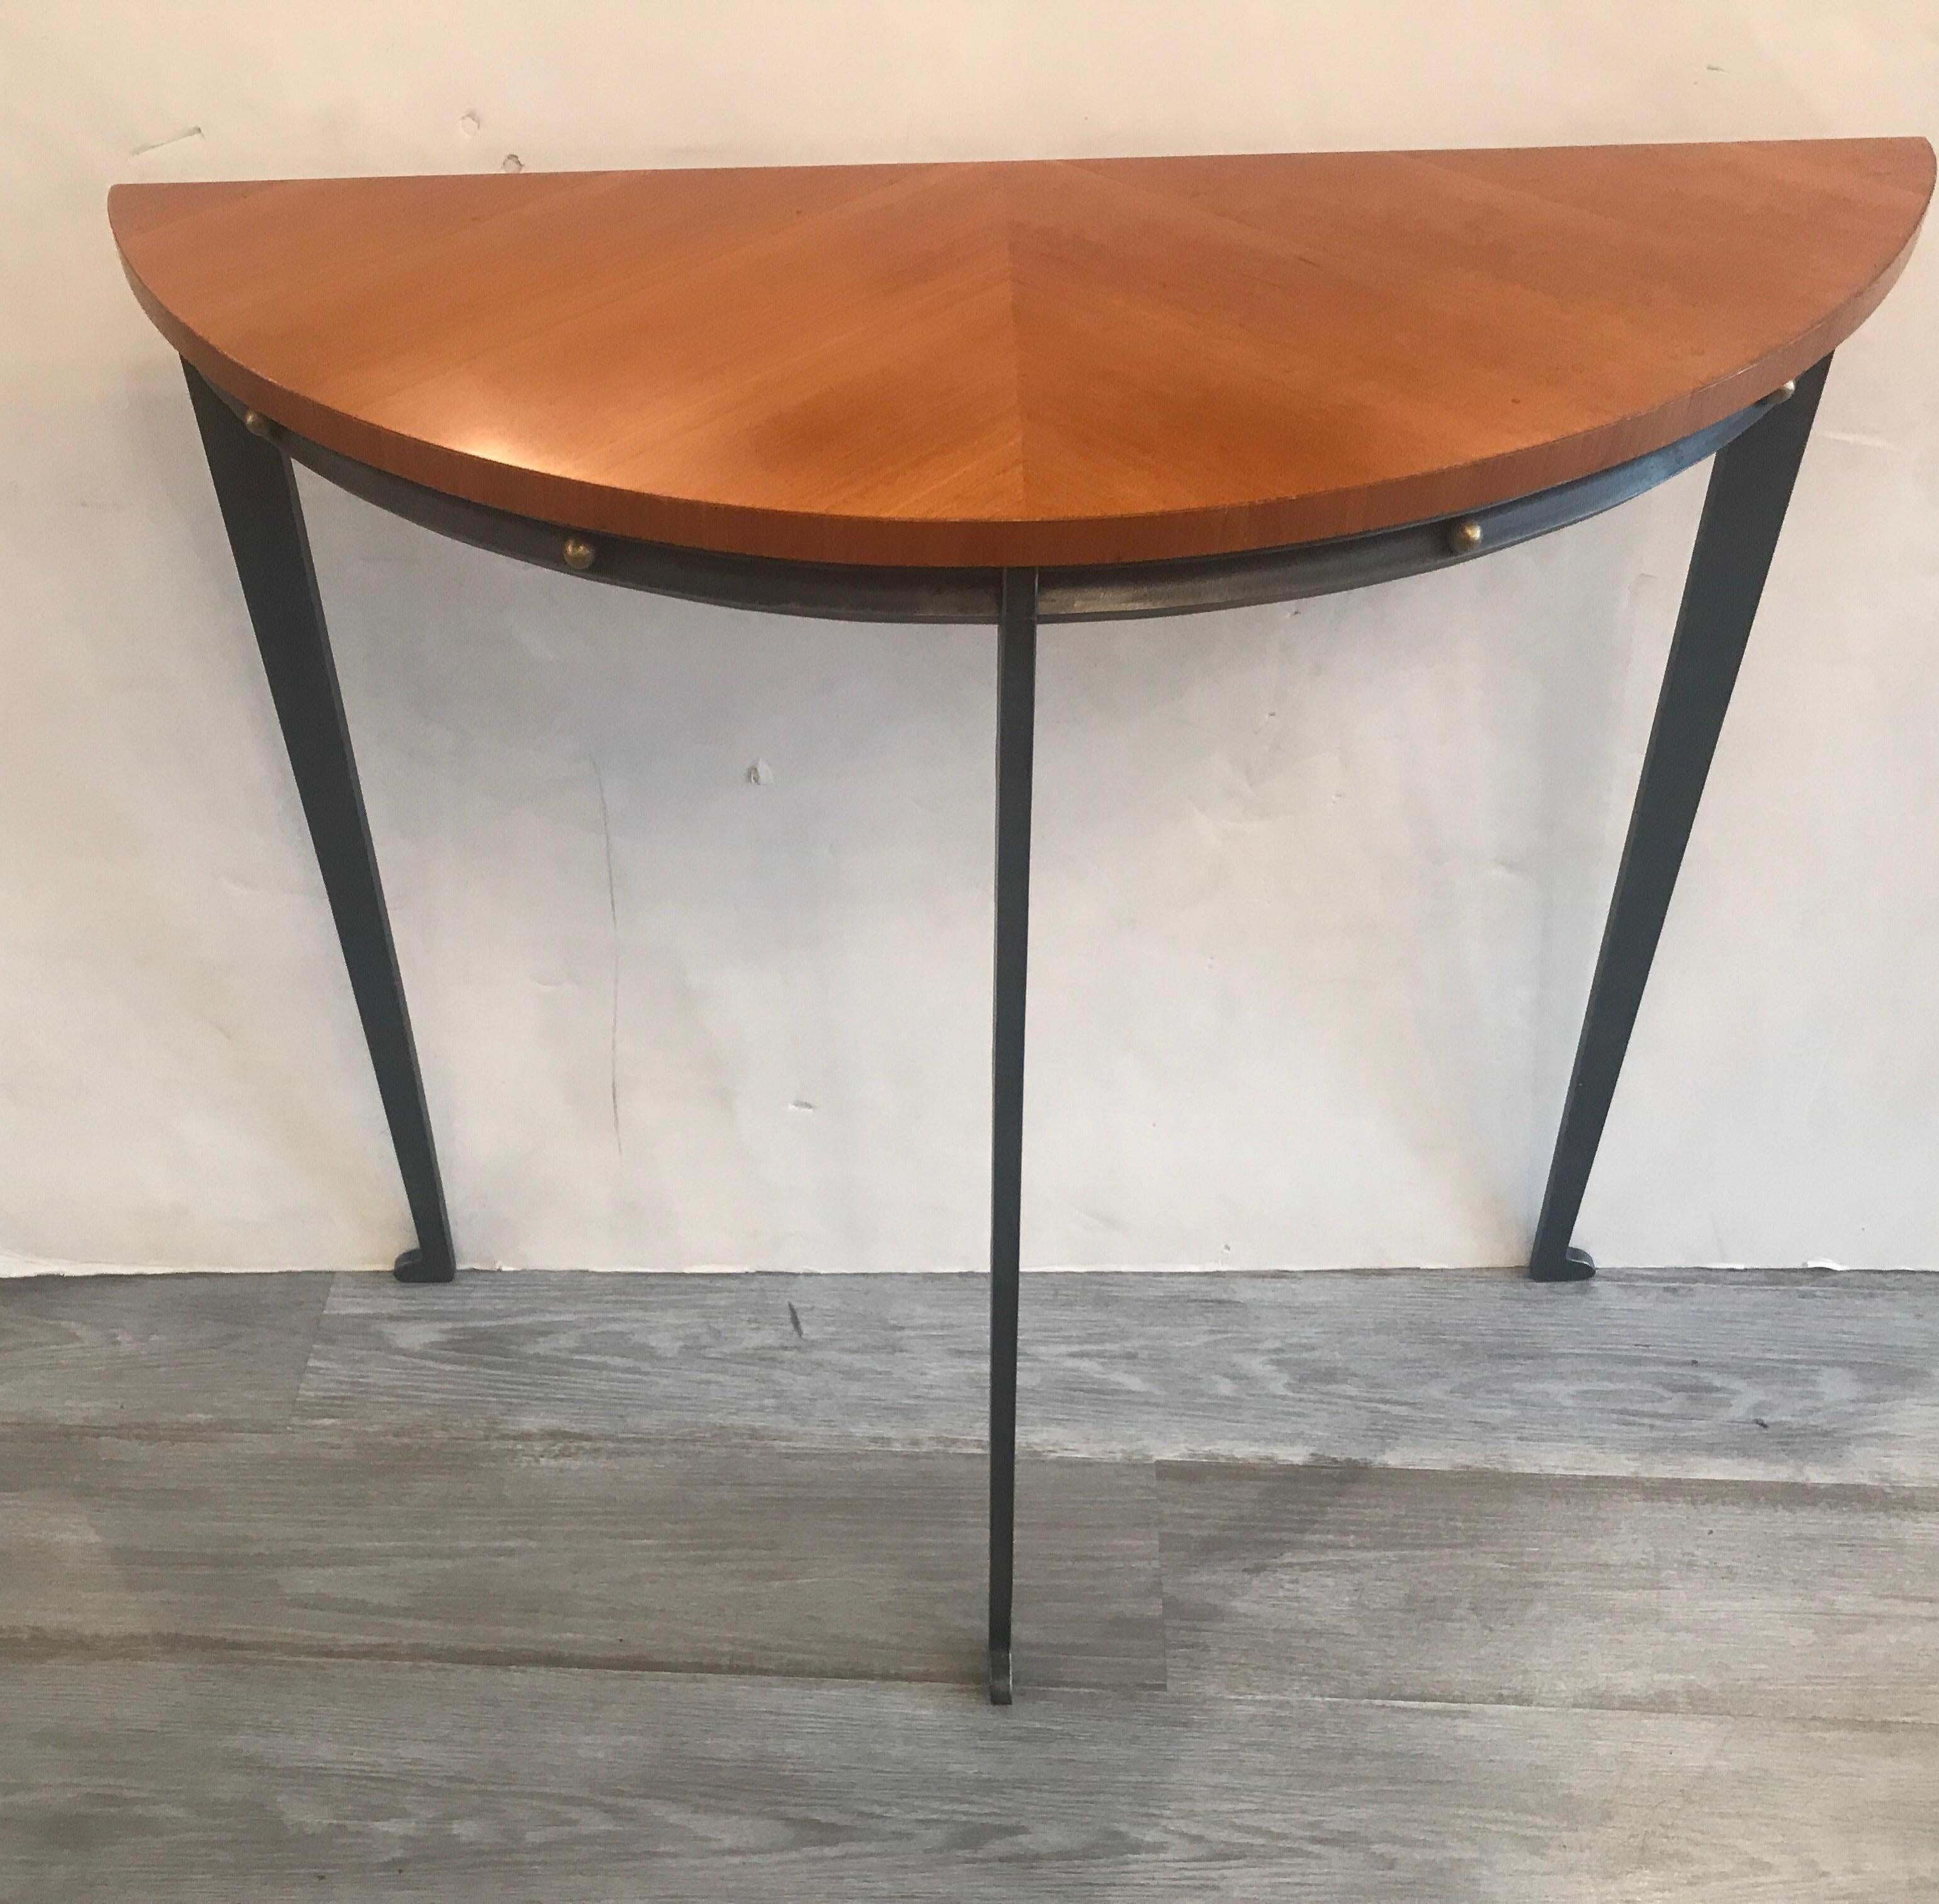 Late 20th Century Demilune Console Steel and Birch Table by Will Stone, NYC